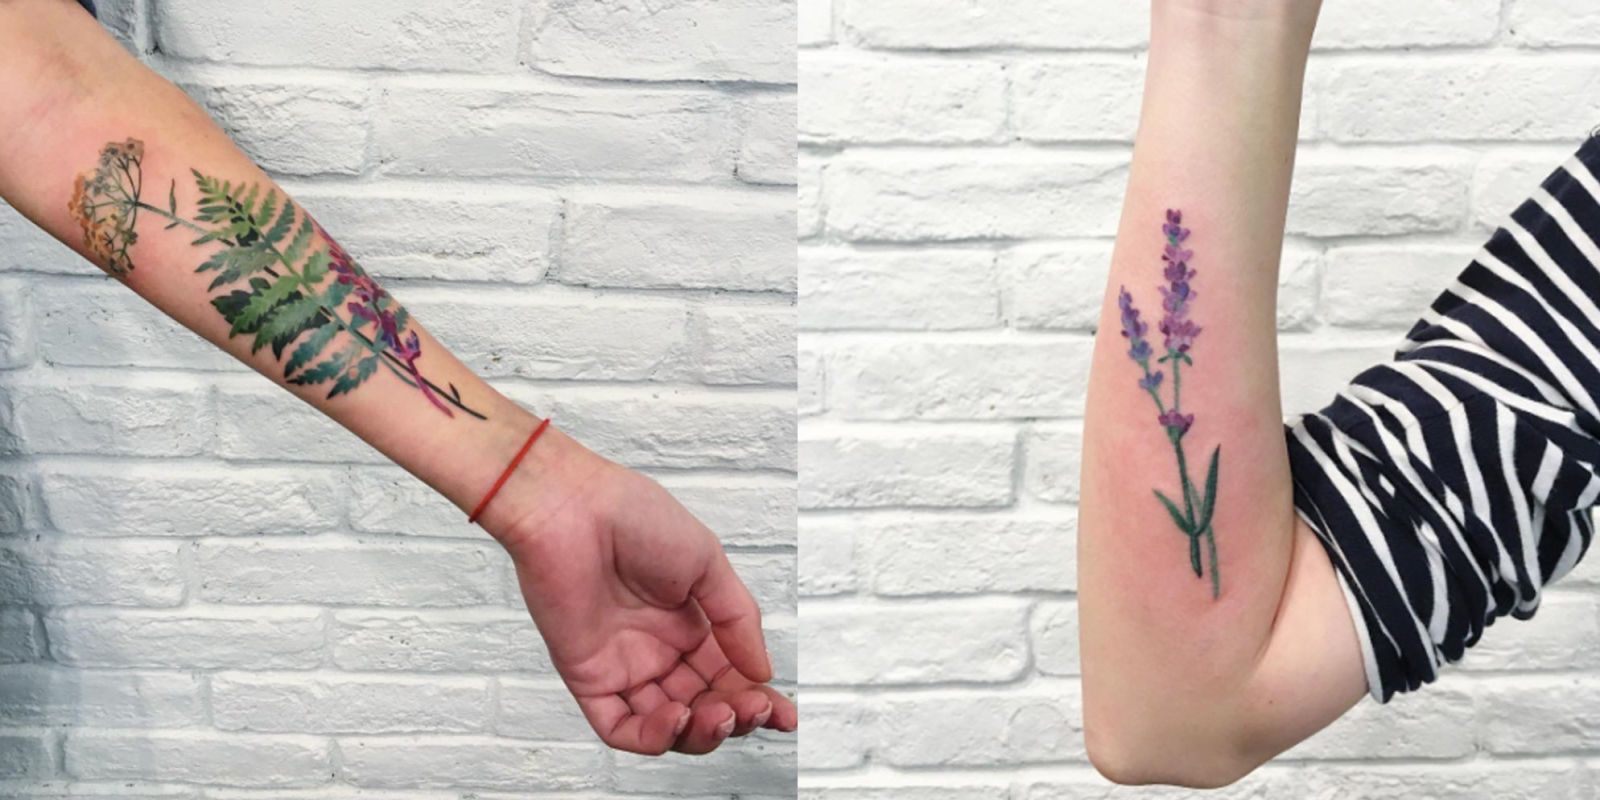 Small Plant Tattoo Sticker Waterproof Purple Lavender Leaf Flowers Lovely  Temporary Tattoos Hand Sleeve Finger Tatoo Fake Color   AliExpress Mobile